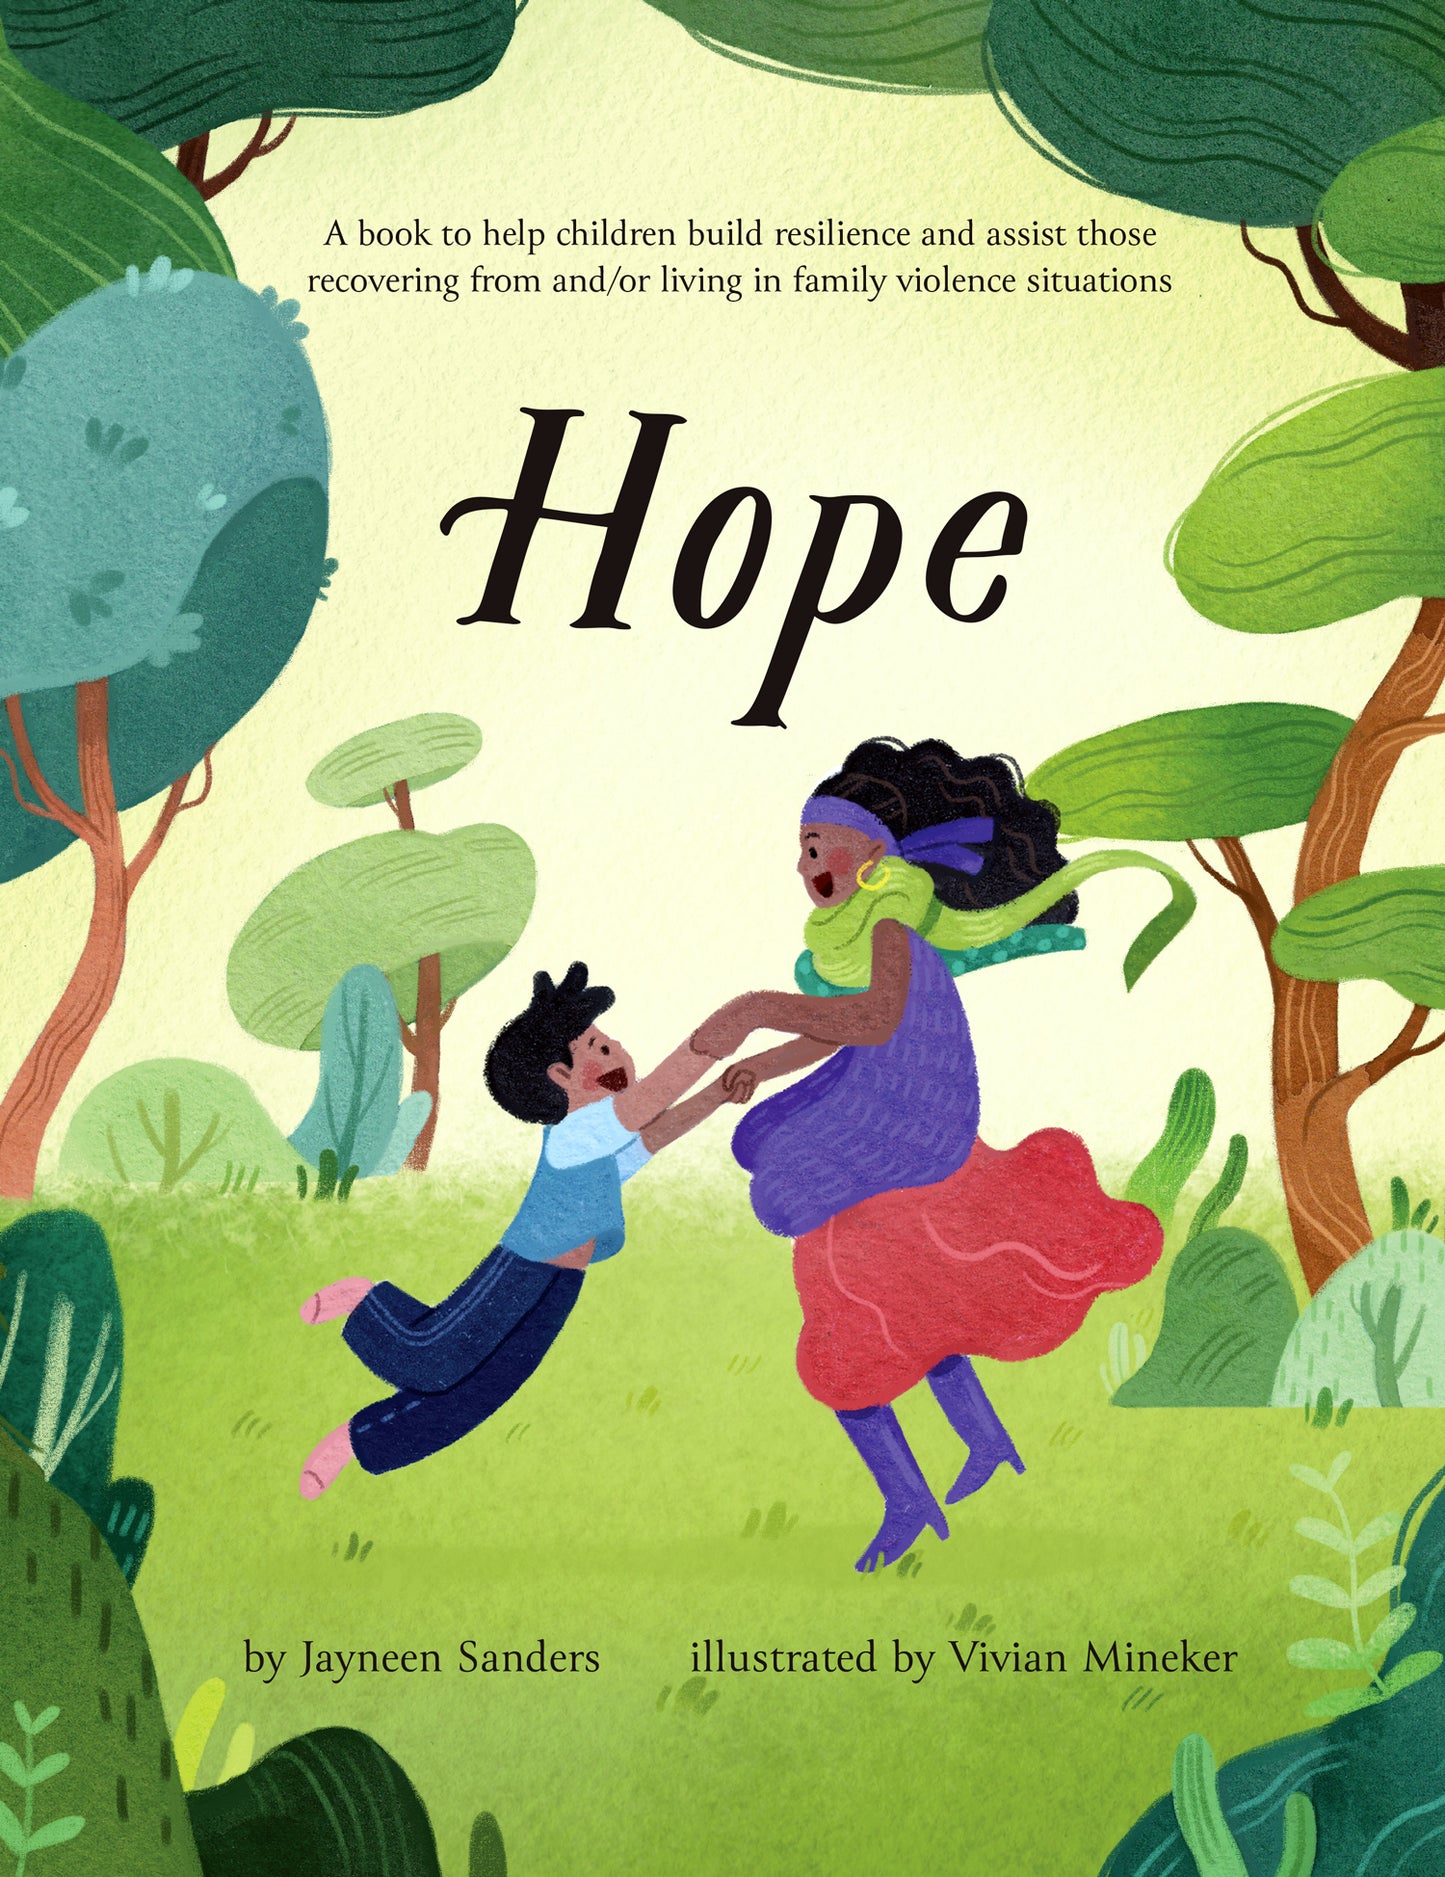 The cover of the book ‘Hope’ by Jayneen Sanders.